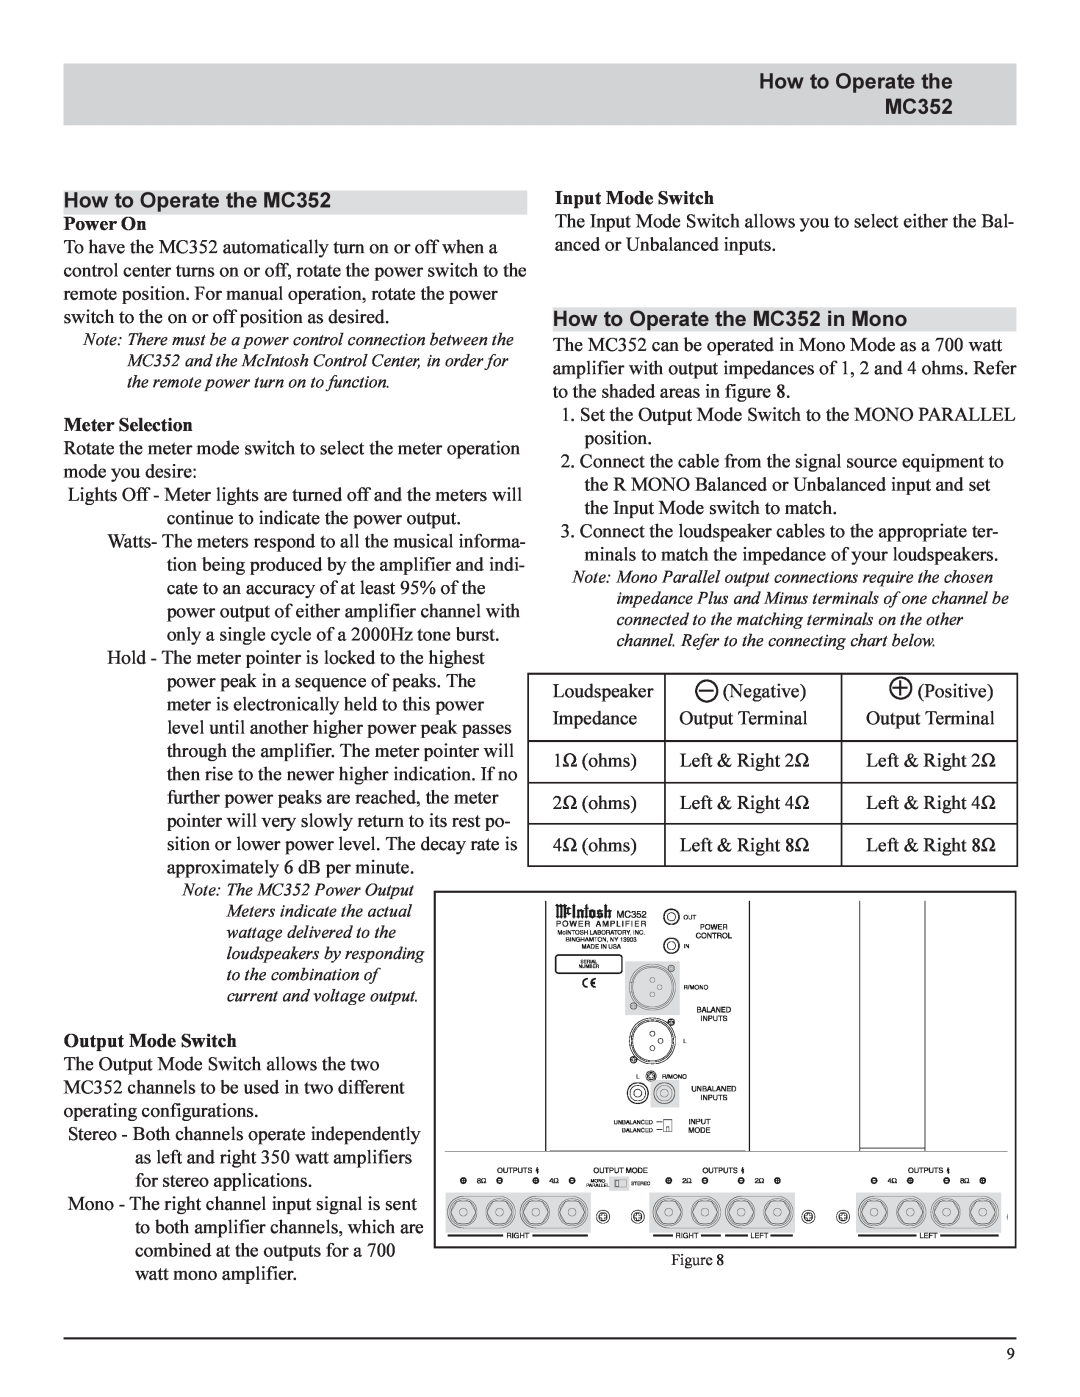 McIntosh manual How to Operate the MC352 in Mono, Power On, Meter Selection, Input Mode Switch, Output Mode Switch 